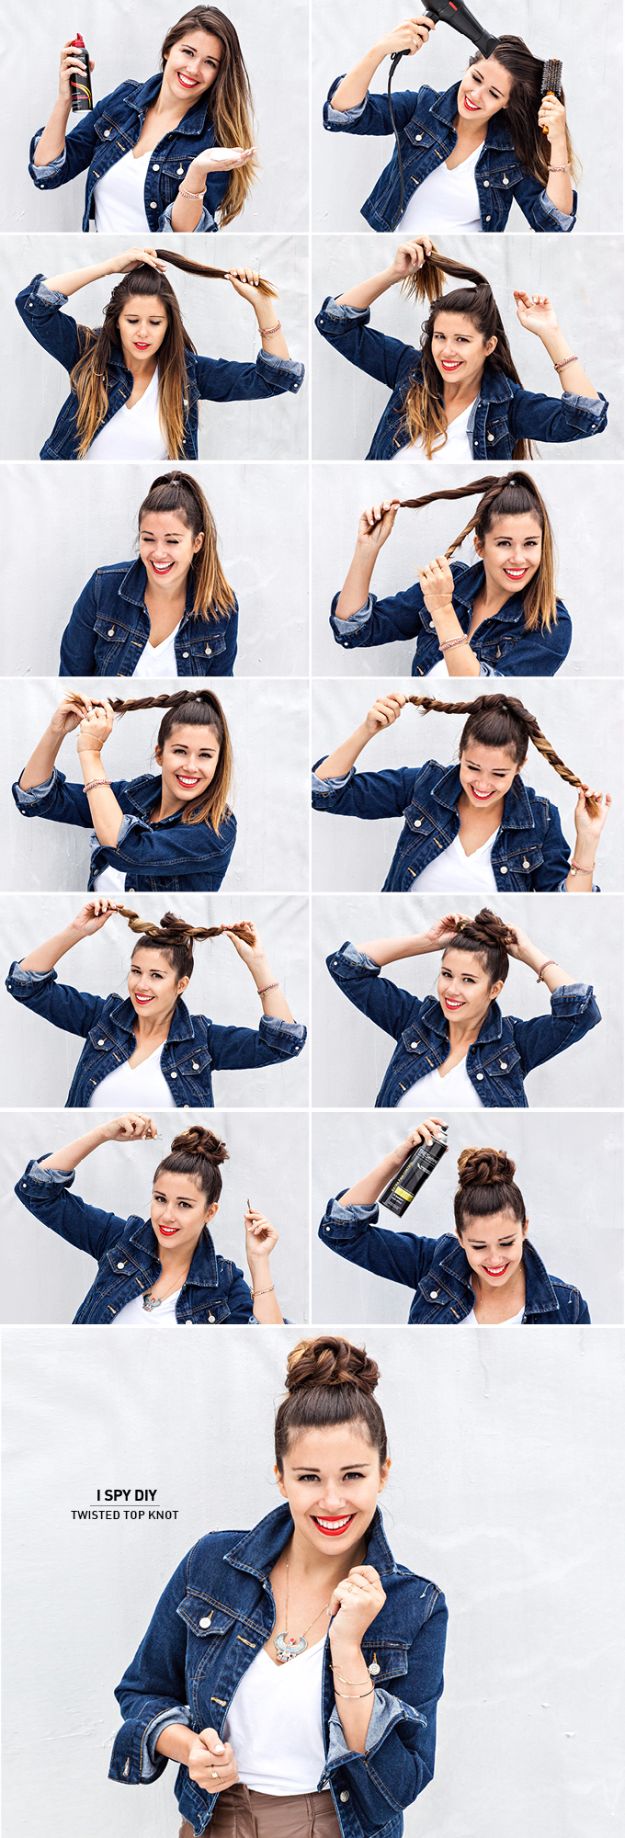 Cool Hair Tutorials for Summer - Twisted Top Knot - Easy Hairstyles and Creative Looks for Hair - Beachy Waves, Hair Styles for Short Hair, Medium Length and Long Hair - Ponytails, Updo Ideas and Quick Last Minute Hairstyle for Teens, Teenagers and Women